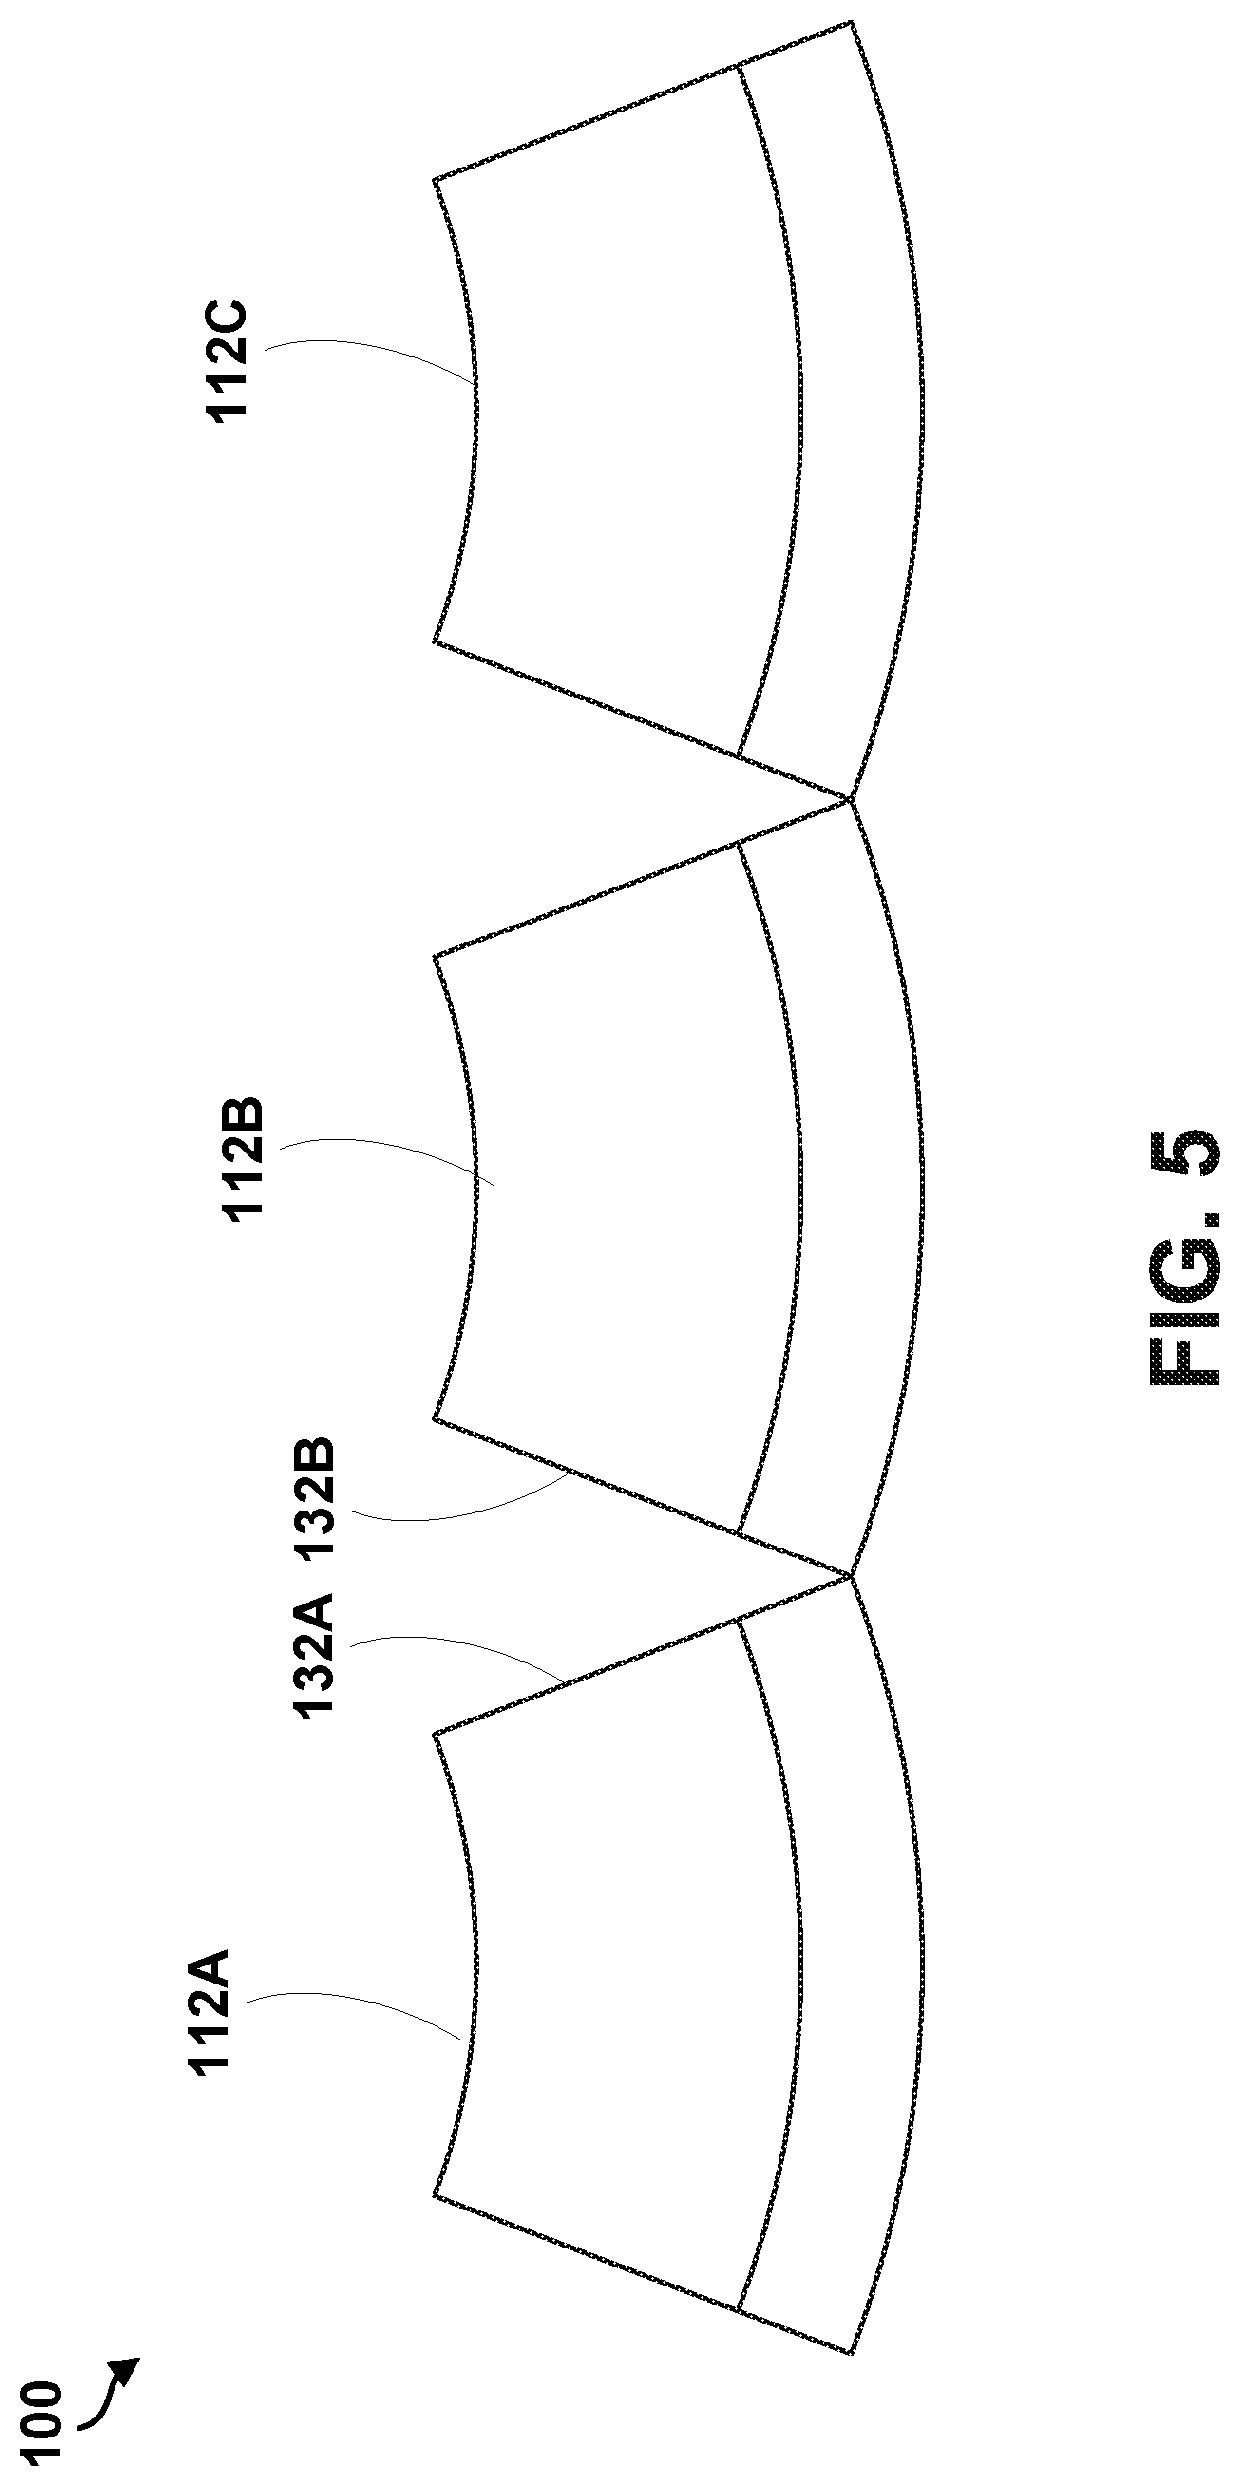 Universal catheter tip and methods of manufacturing